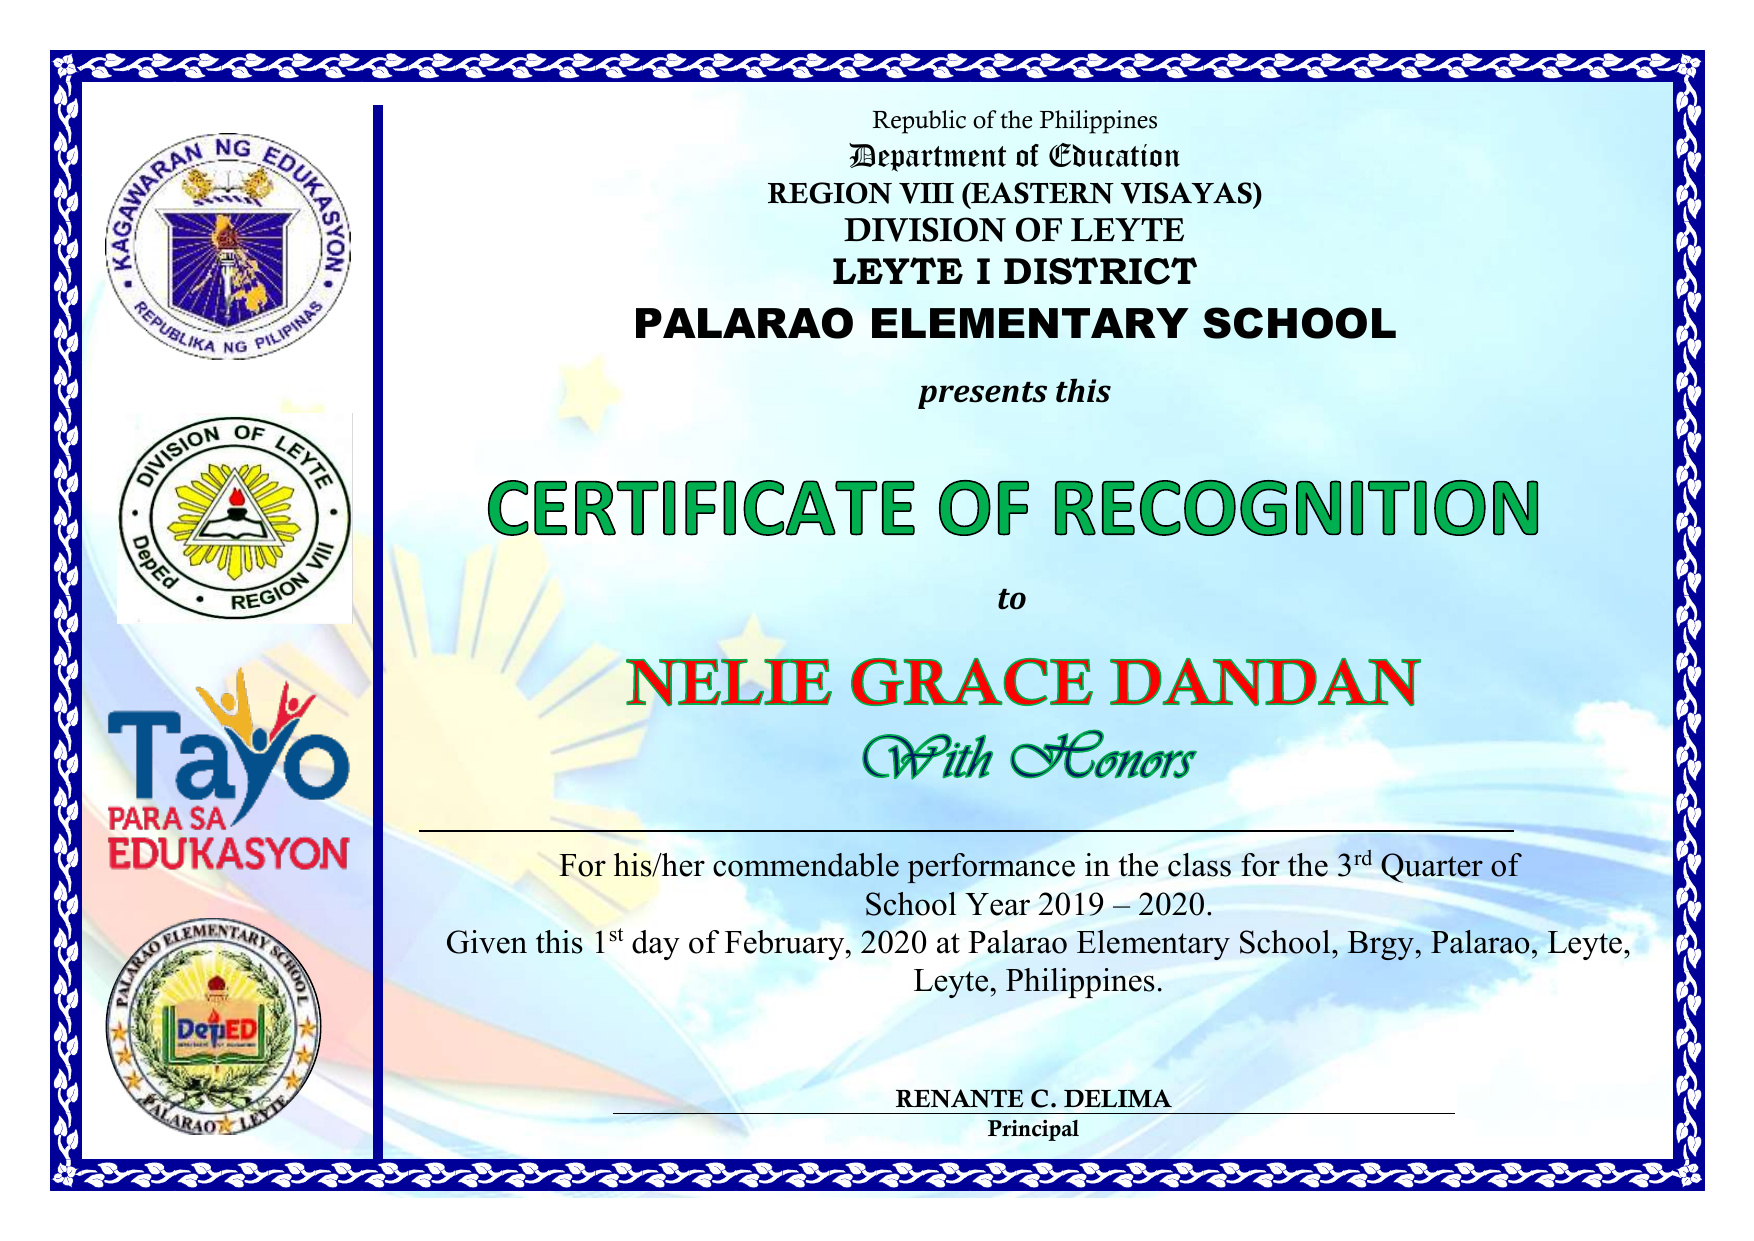 deped-cert-of-recognition-template-certificate-of-recognition